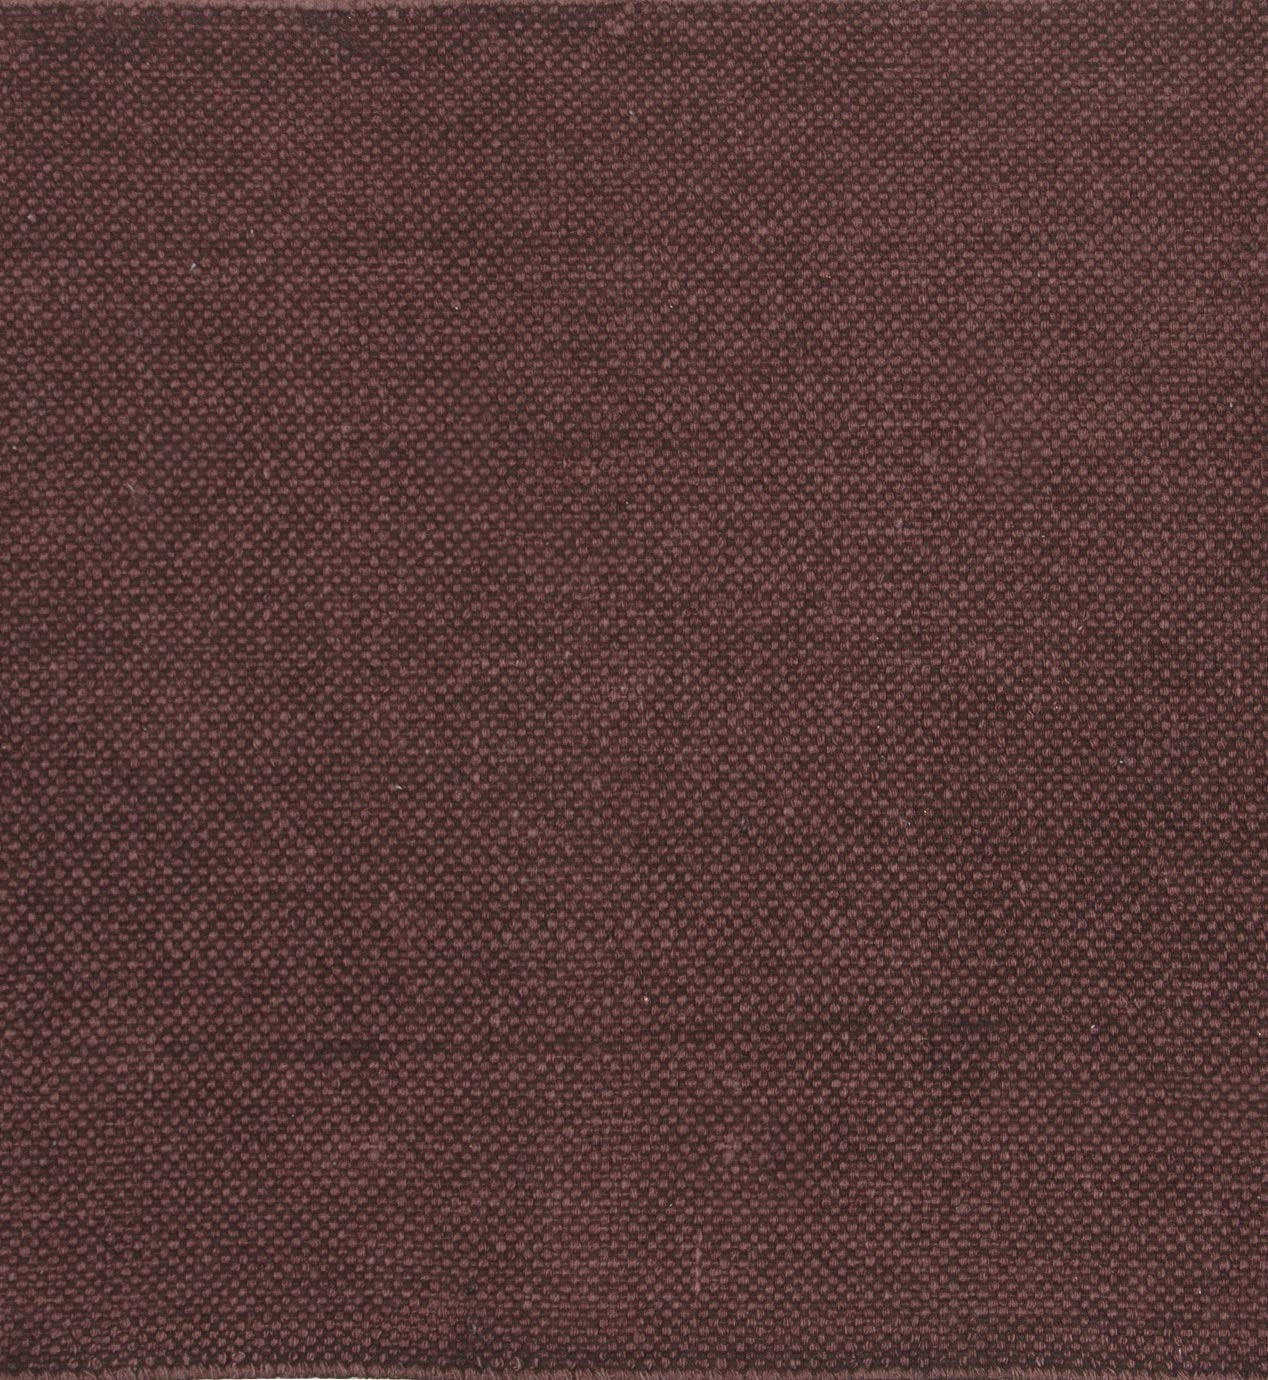 SWHF Cotton Solid Rug: 18 X 30 Inch (Brown)